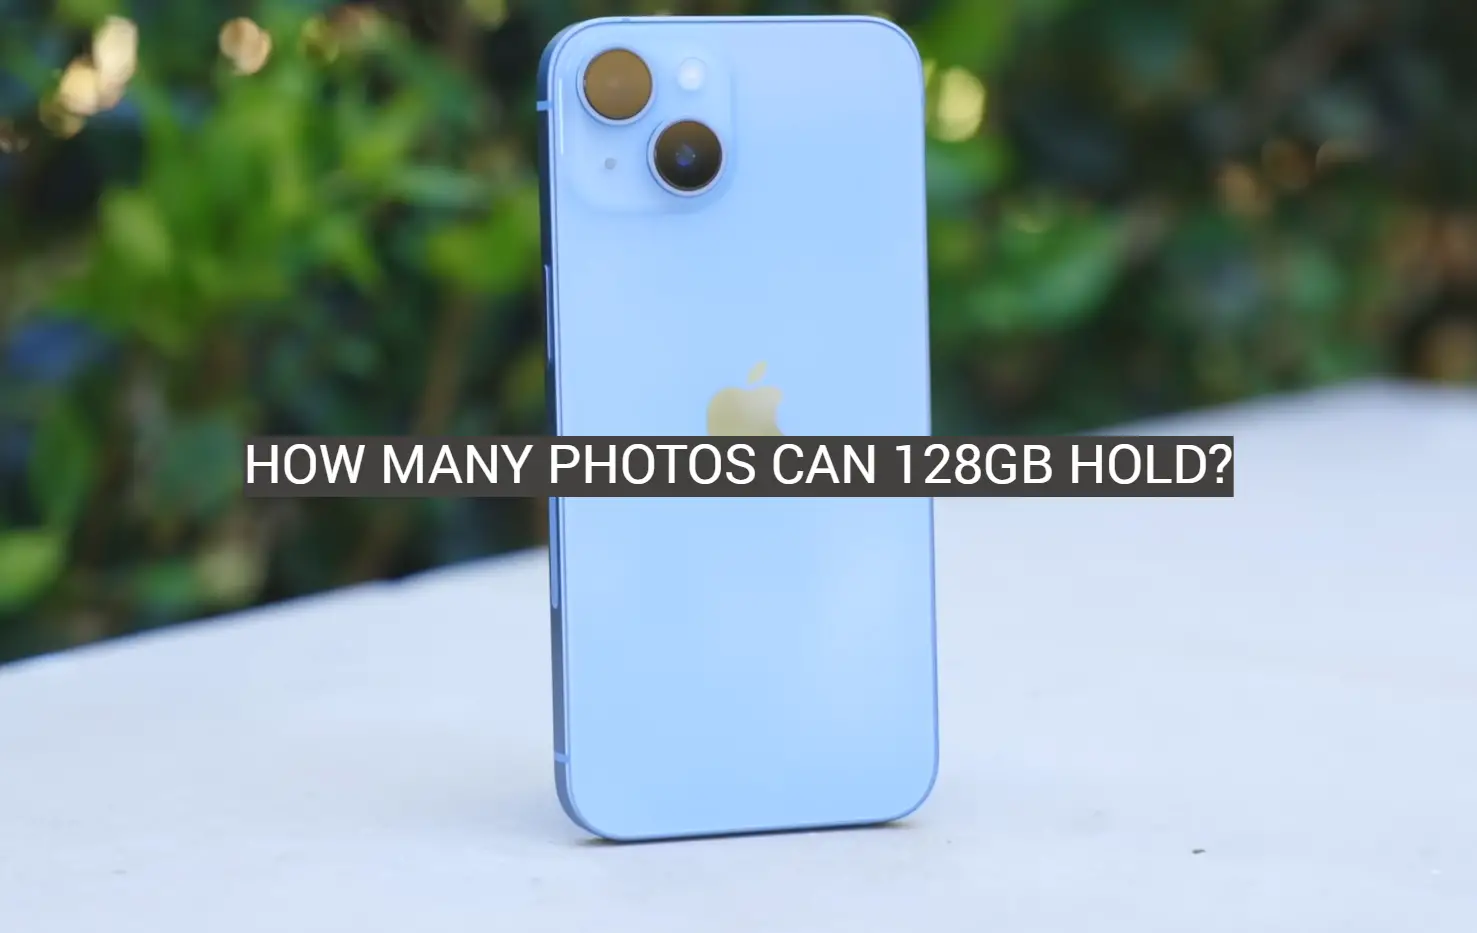 How Many Photos Can 128GB Hold?